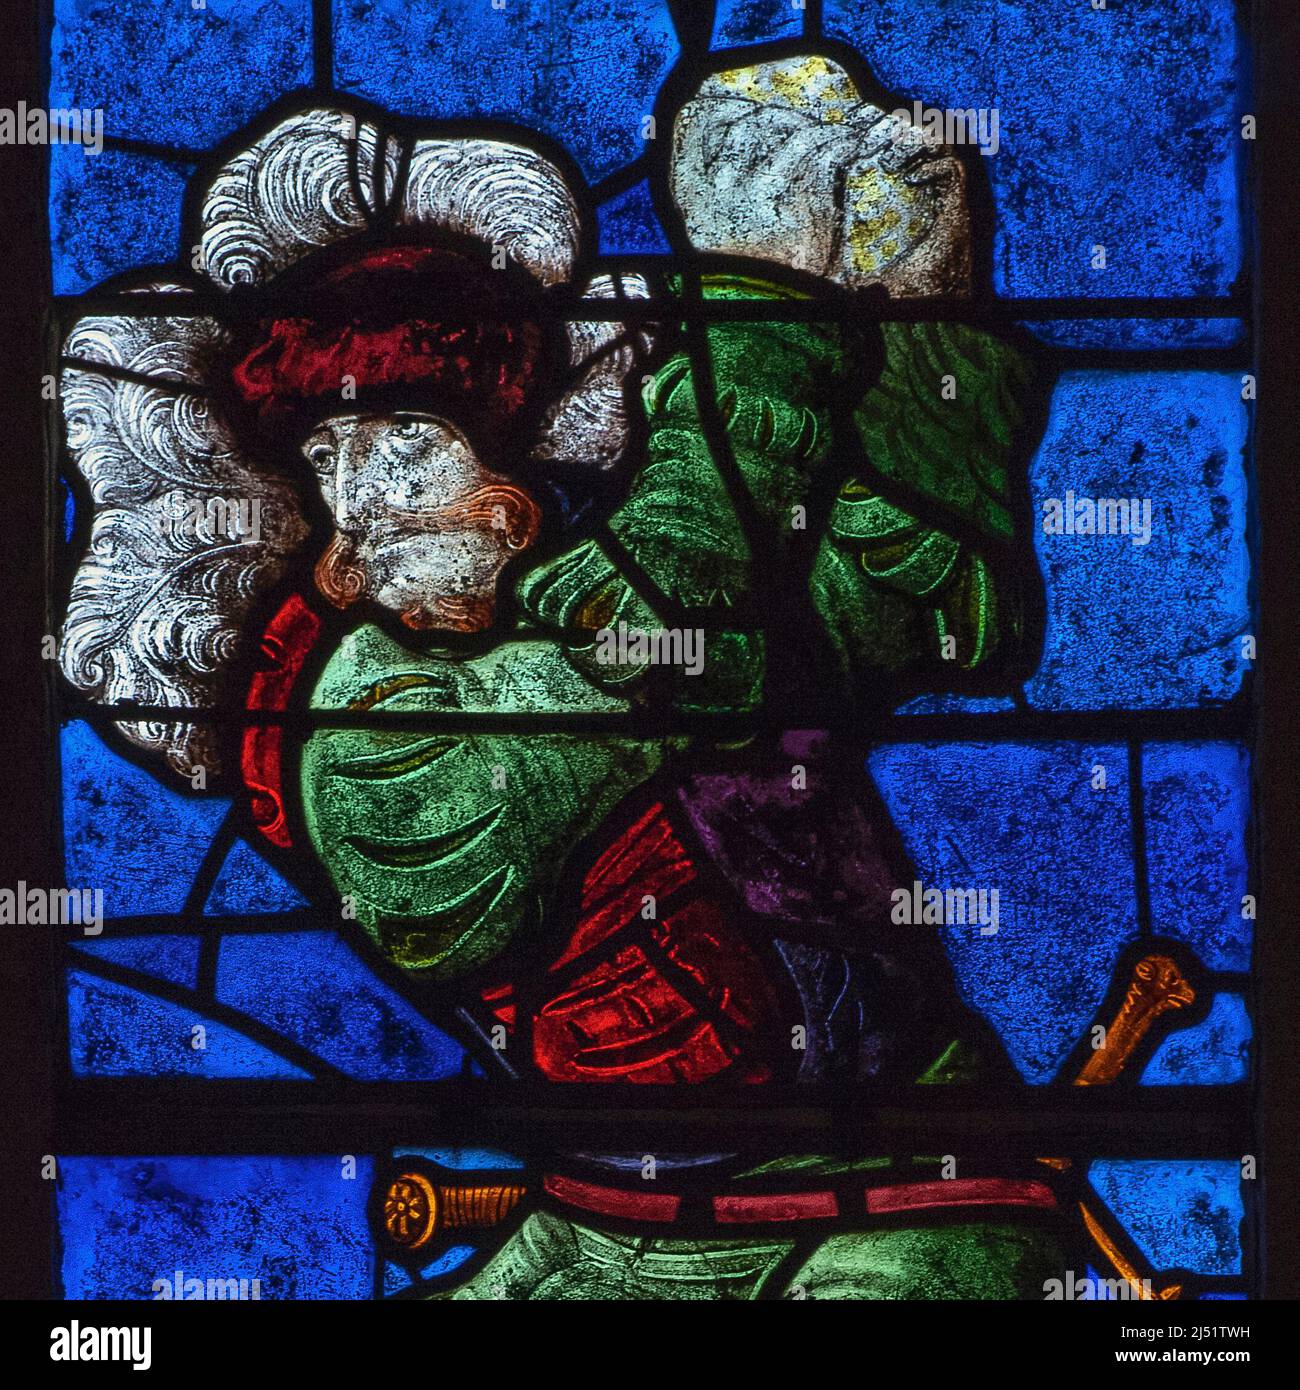 An executioner in colourful Renaissance costume hurls rocks at the first Christian martyr, Saint Stephen, in this square format detail of vivid early 1500s stained glass in the Église Saint-Rémi at Ceffonds, in France's Champagne region.  The colours are typical of 16th century glass made in the workshops at Troyes, the historic regional capital. Stock Photo